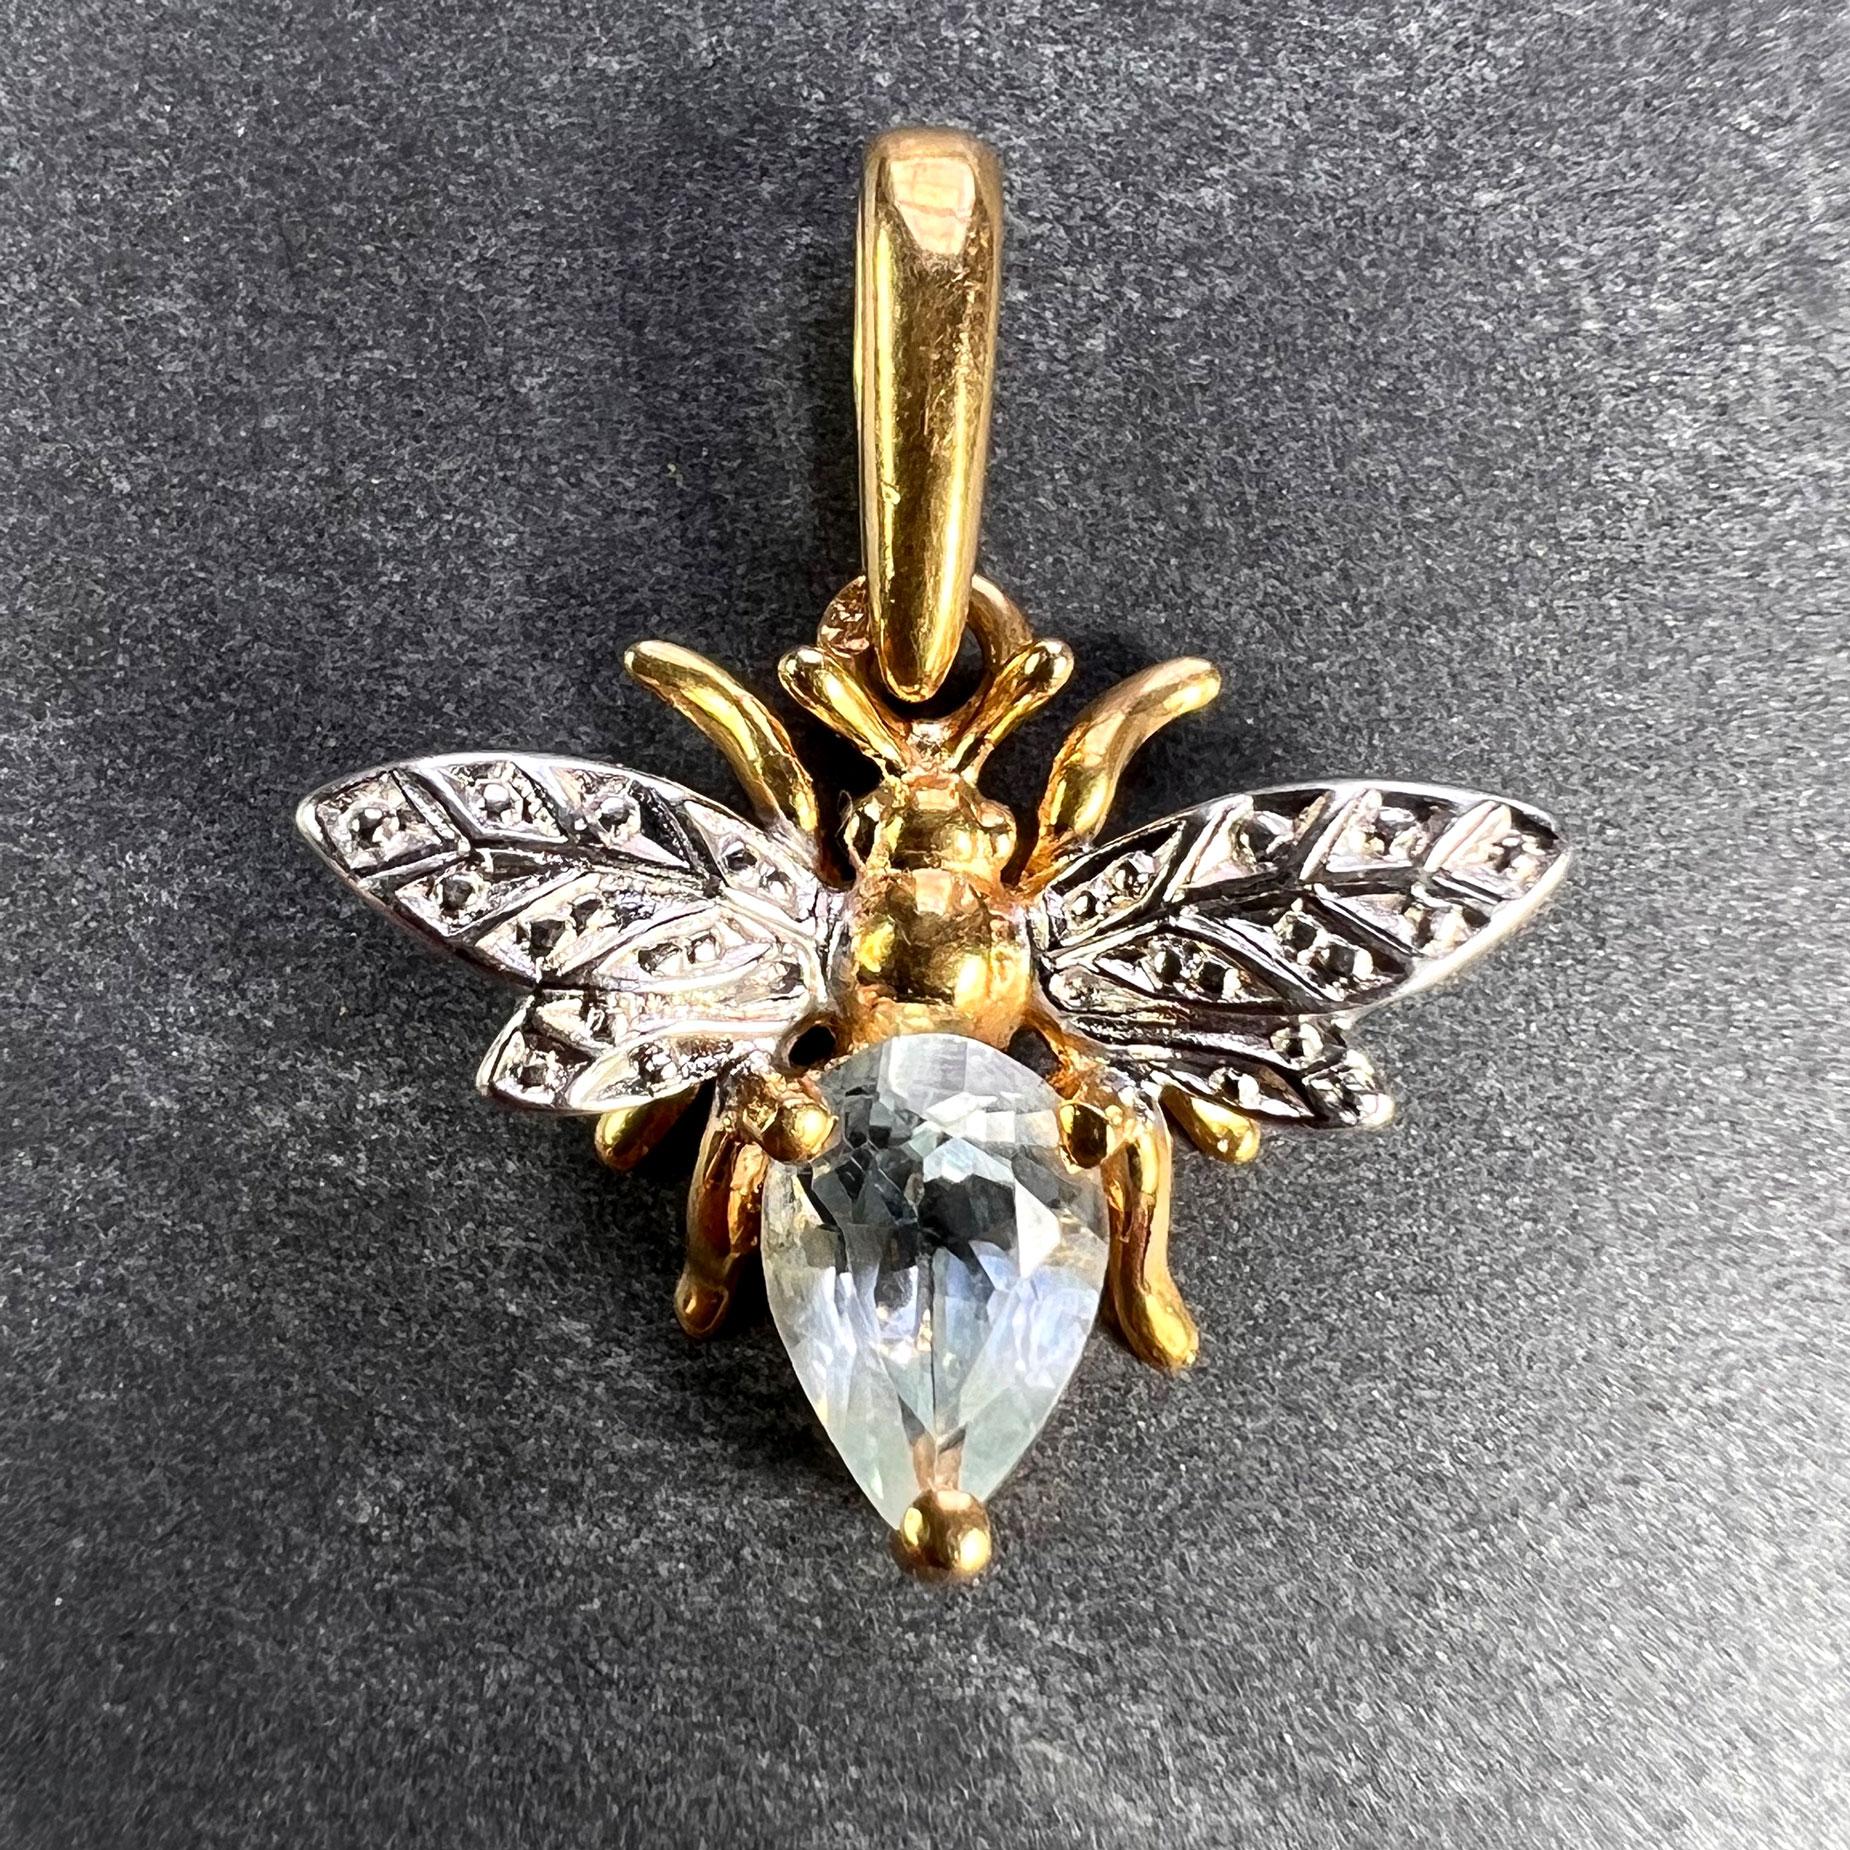 A French 18 karat (18K) yellow and white gold charm pendant designed as a honey bee set with a pear-shaped aquamarine weighing approximately 0.43 carats to the body. Stamped with the eagle’s head mark for 18 karat gold and French manufacture, and an